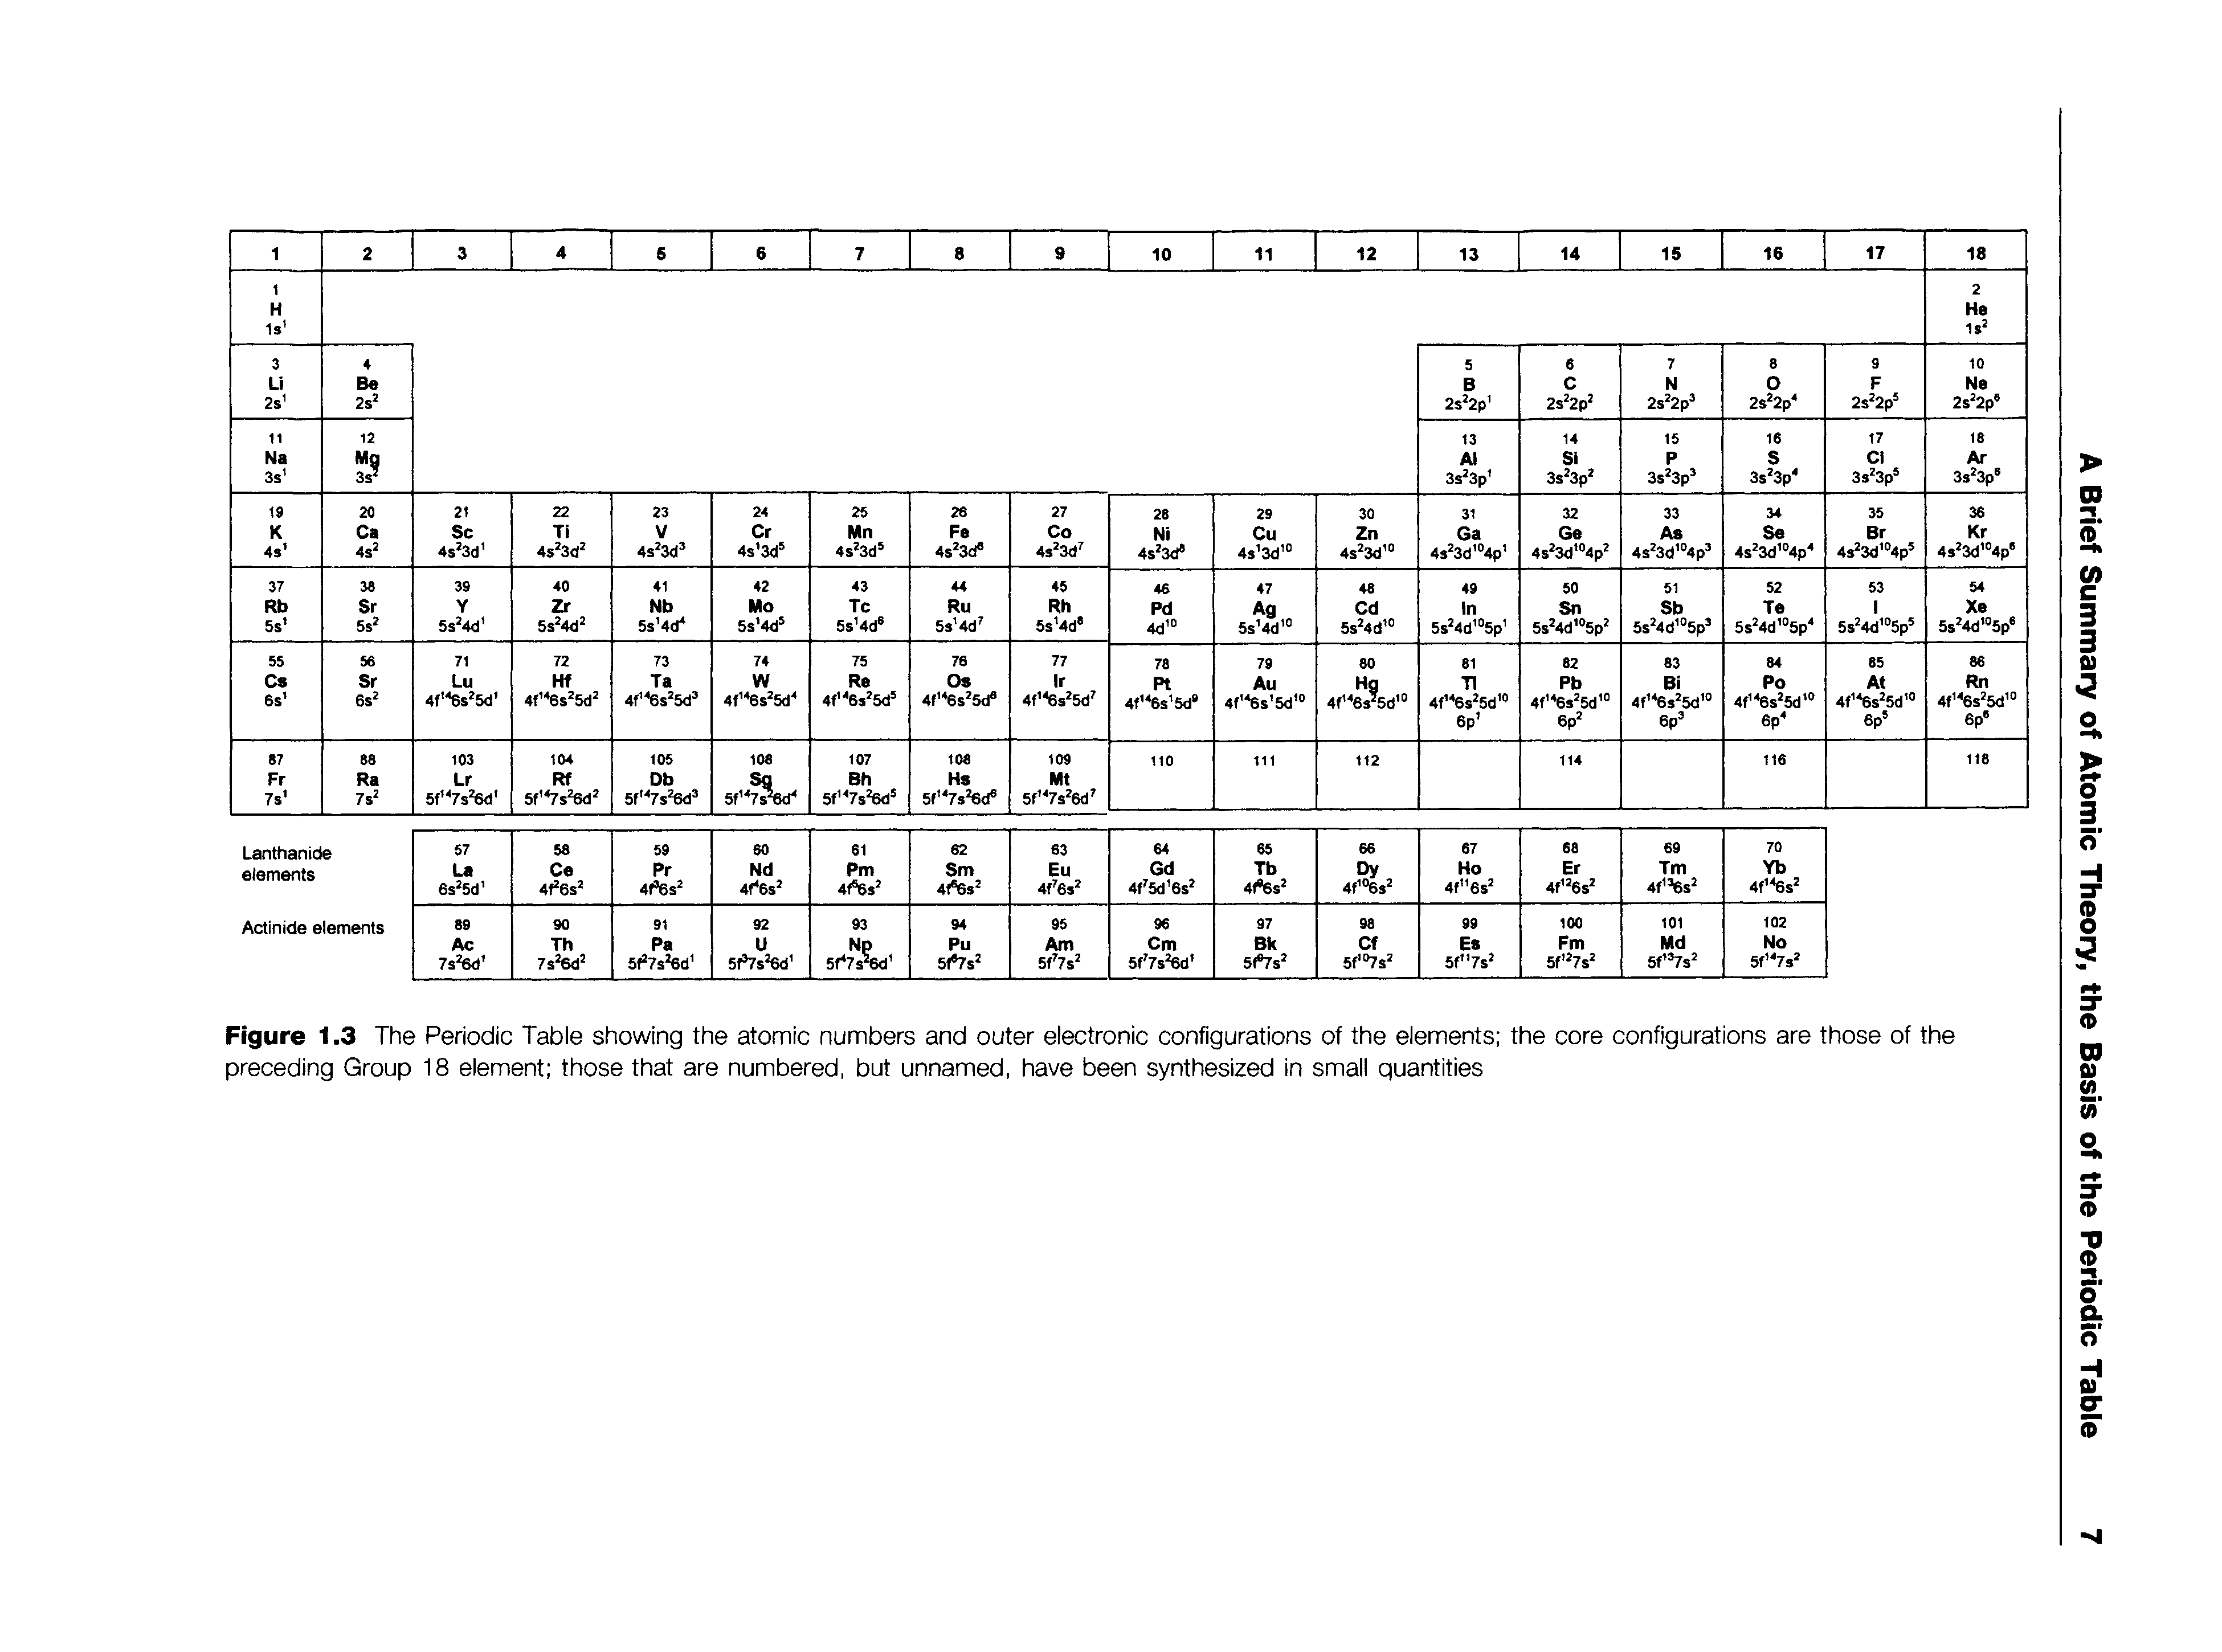 Figure 1.3 The Periodic Table showing the atomic numbers and outer electronic configurations of the elements the core configurations are those of the preceding Group 18 element those that are numbered, but unnamed, have been synthesized in small quantities...